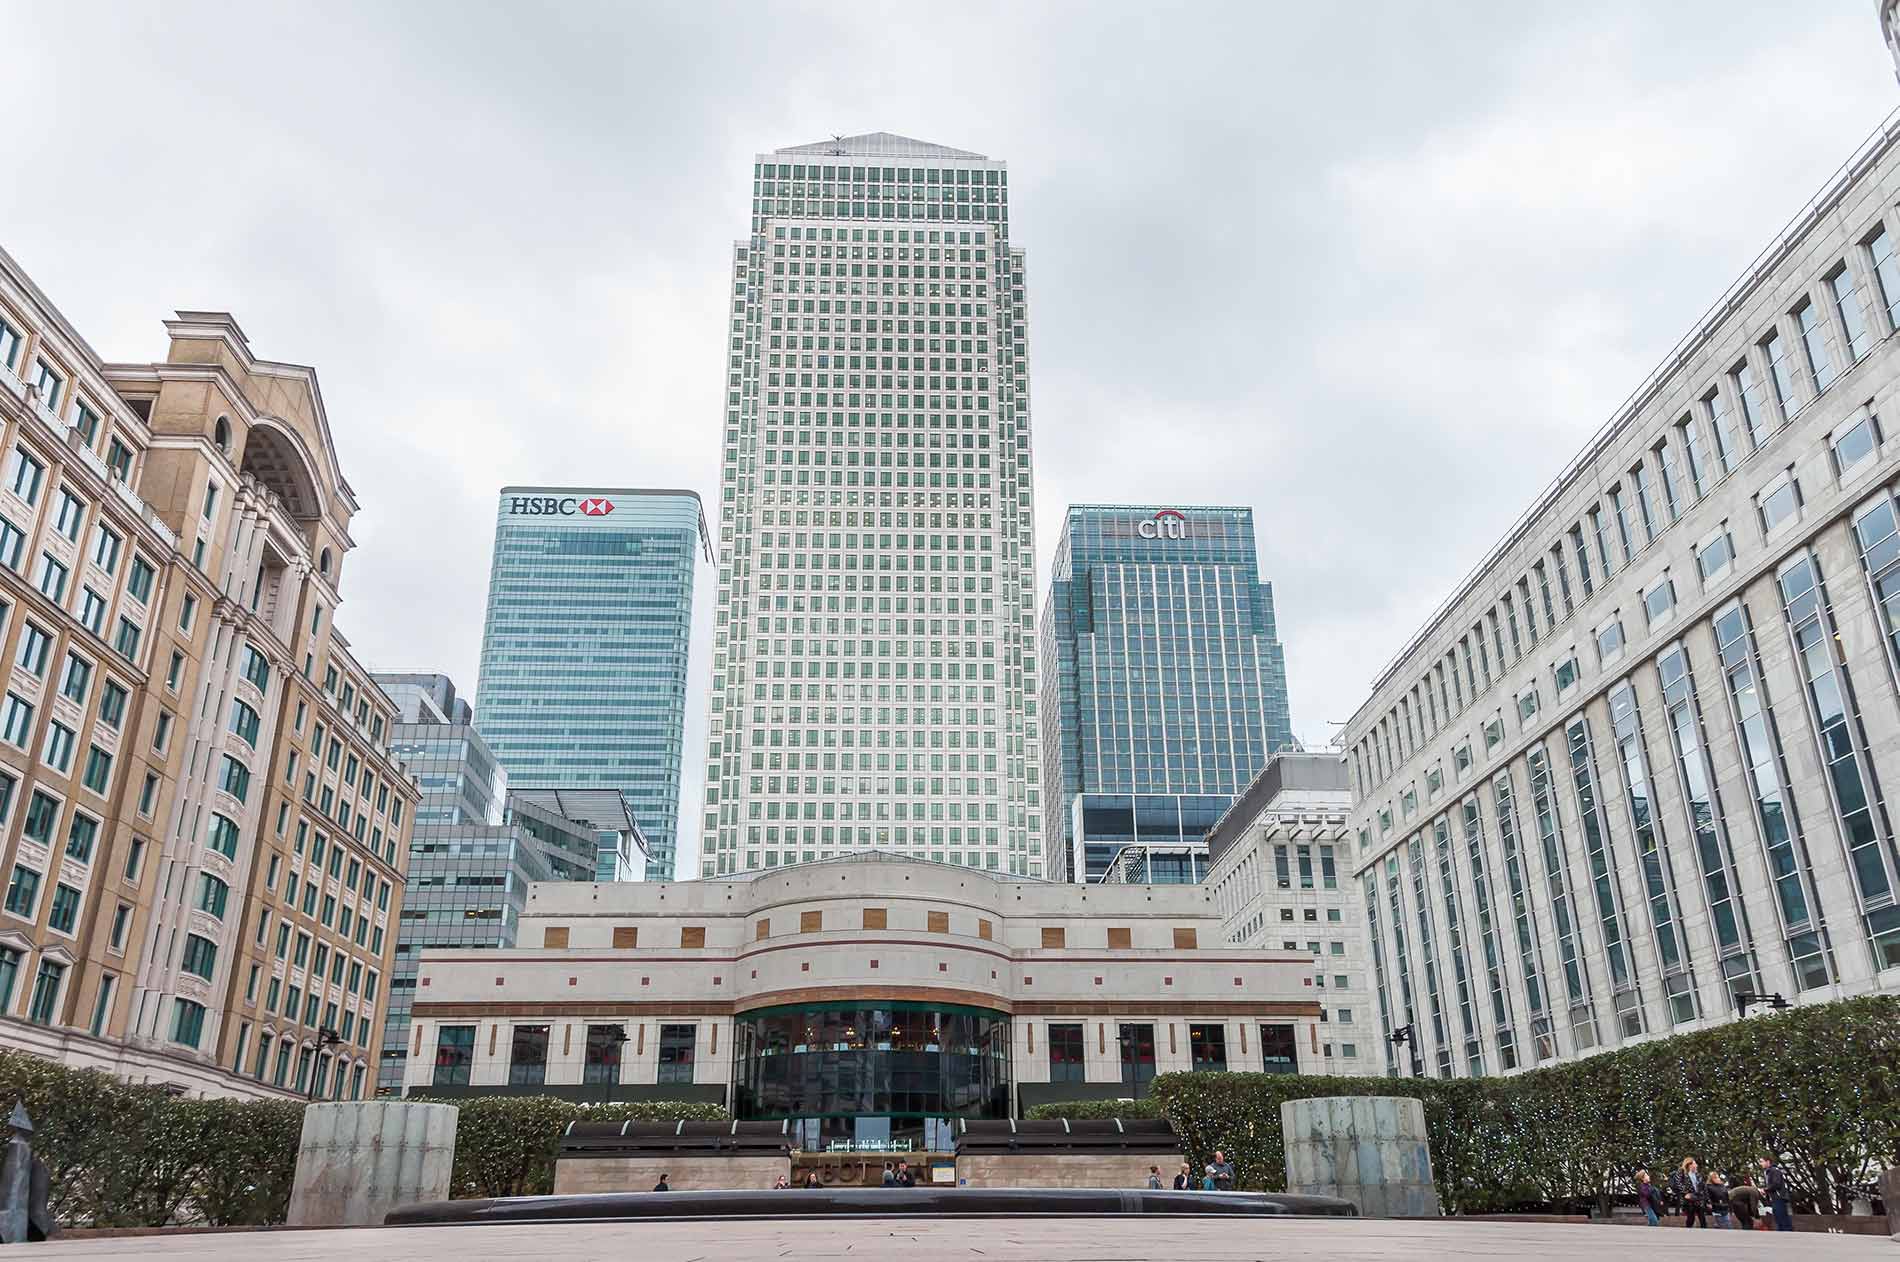 Cabot Square at Canary Wharf, UK